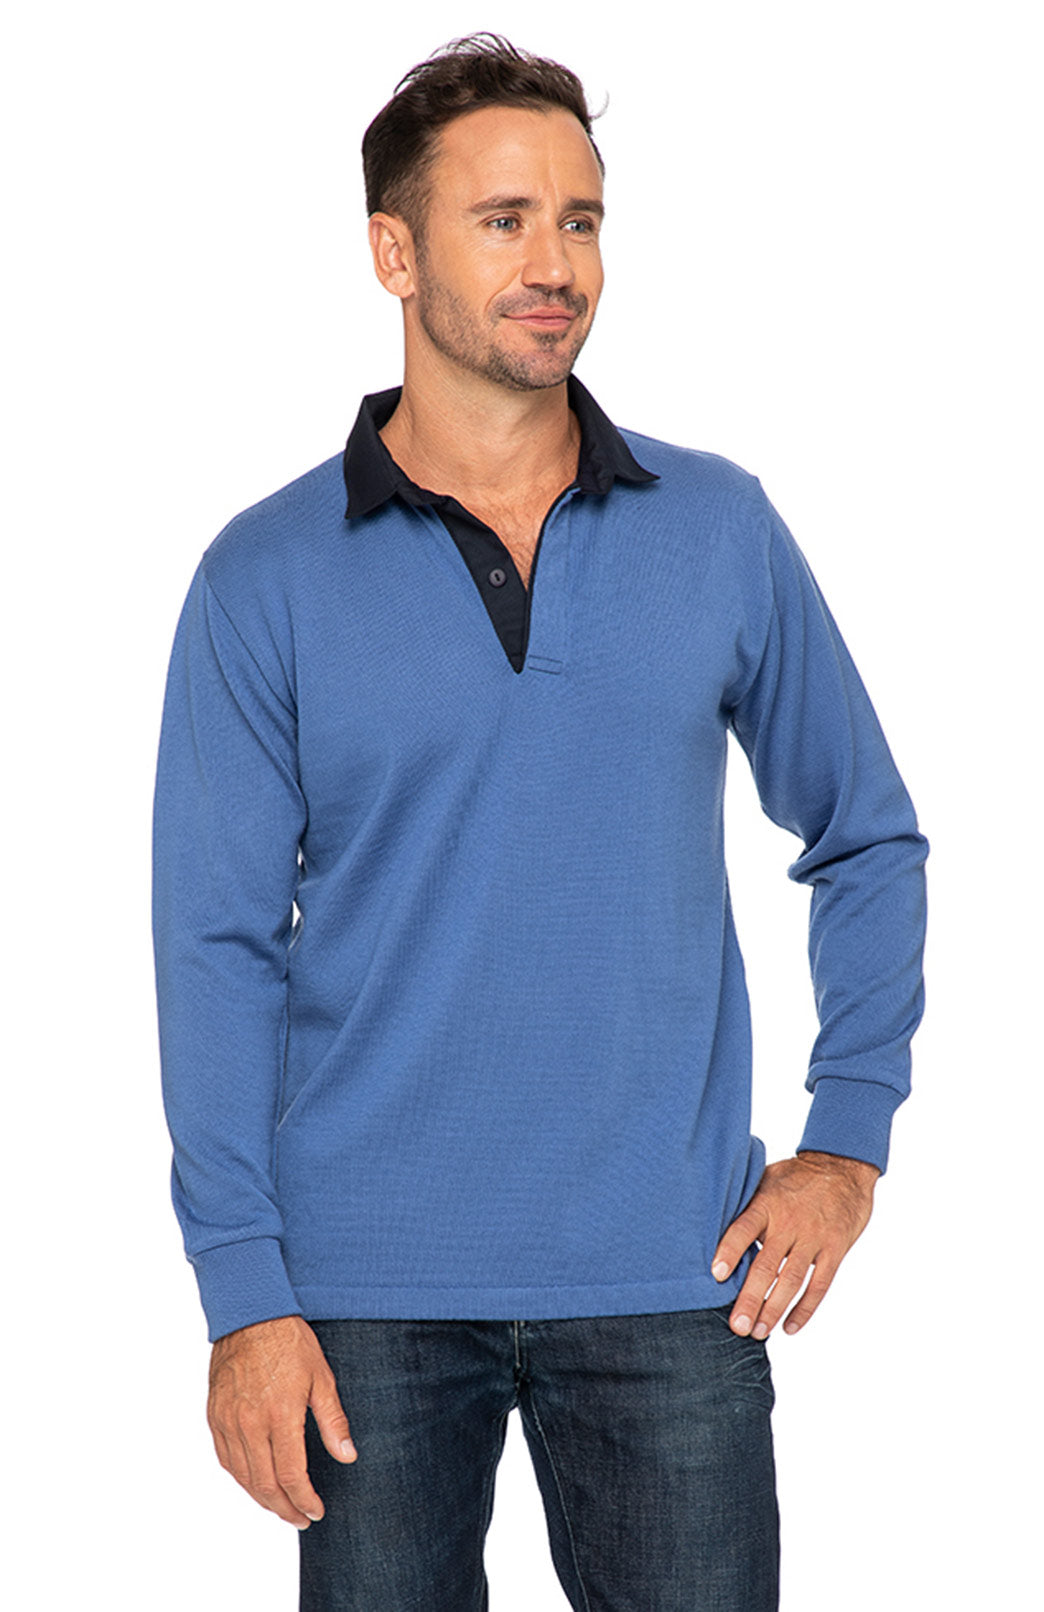 Fawn Unisex Classic Merino Wool Rugby Top
